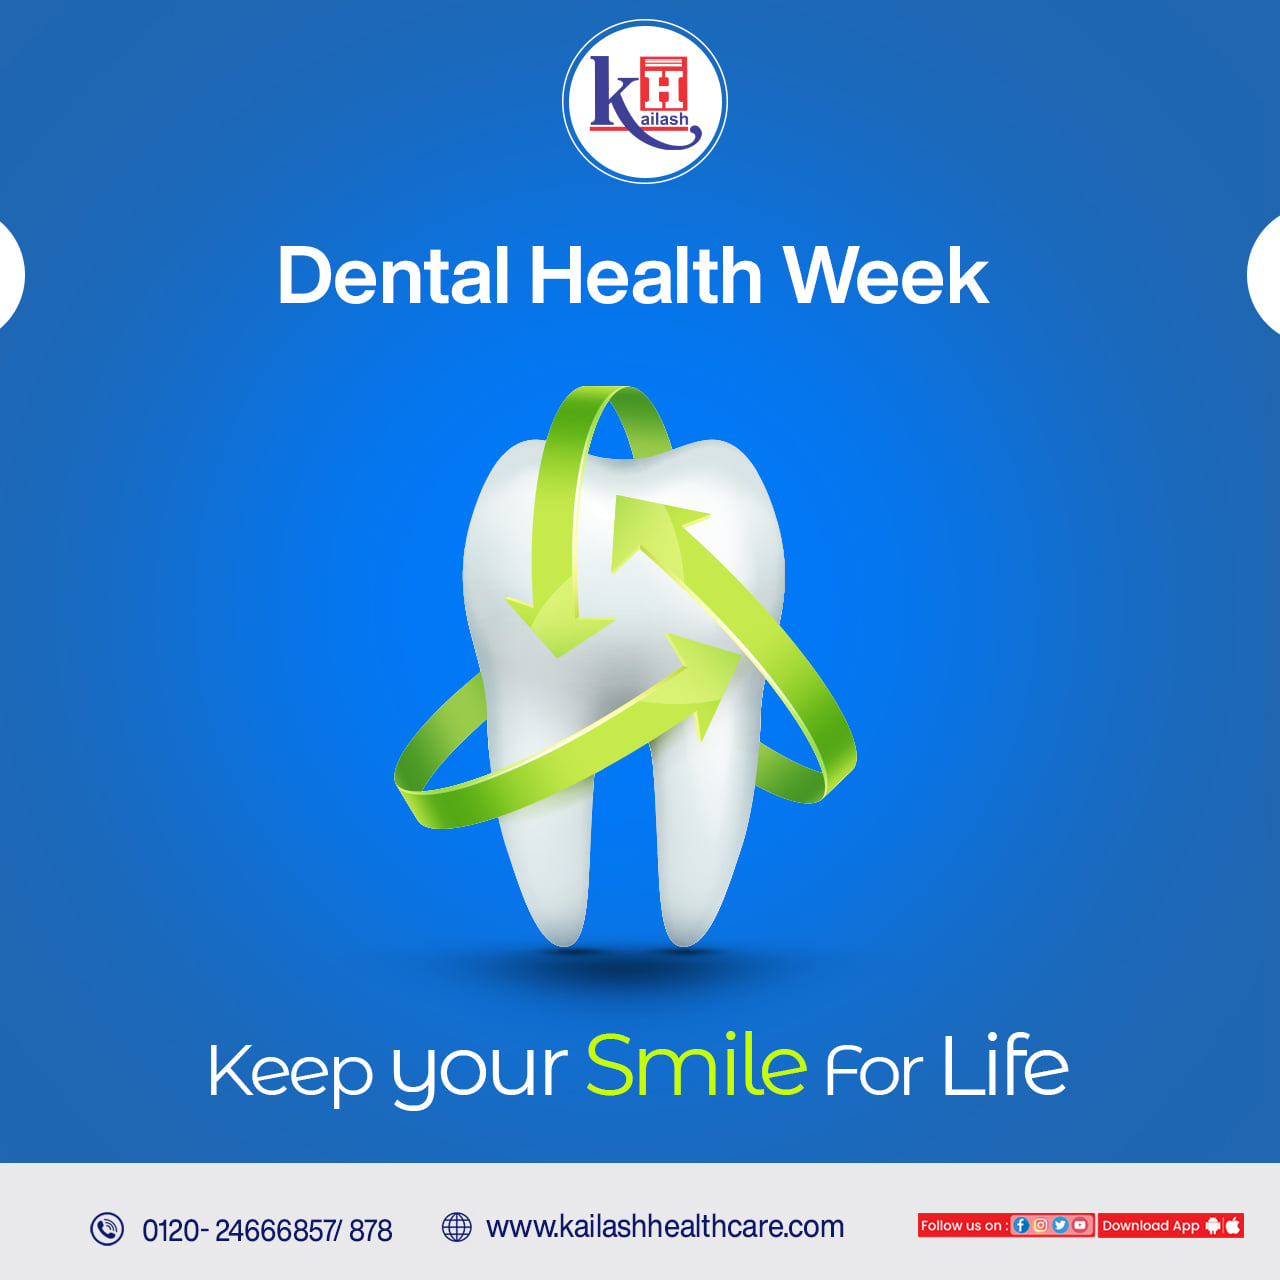 Dental Health is the mirror of your overall well being. Regular Oral Hygiene & Dental visits can keep your SMILE healthy for life.